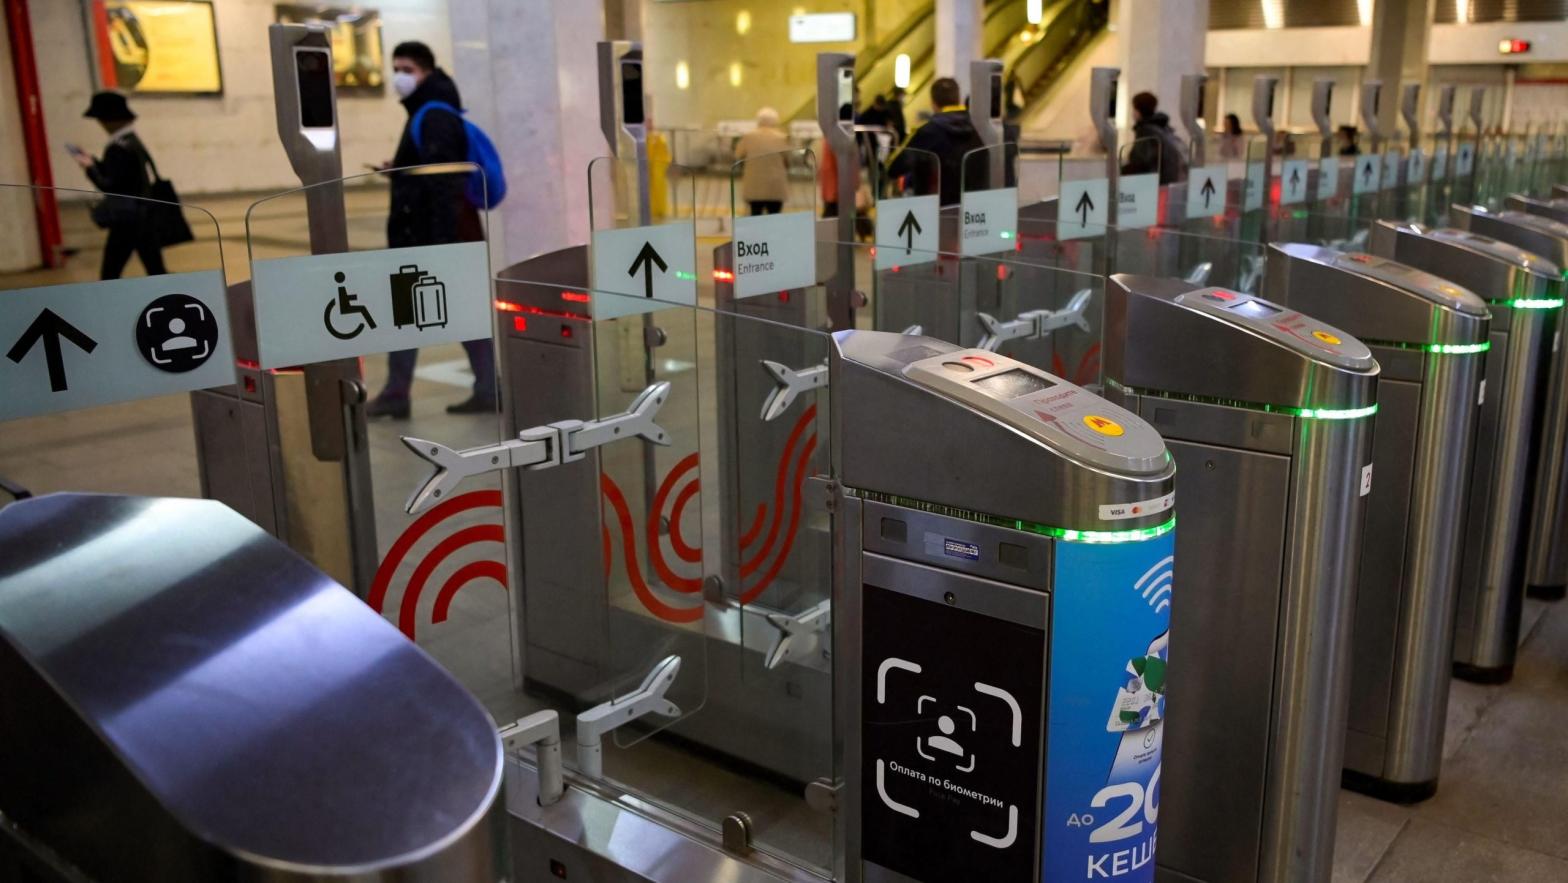 A sign sits on a ticket gate equipped with a facial recognition fare payment system - Face Pay - at Turgenevskaya metro station in Moscow on September 23, 2021. (Photo: Natalia Kolesnikova / AFP, Getty Images)